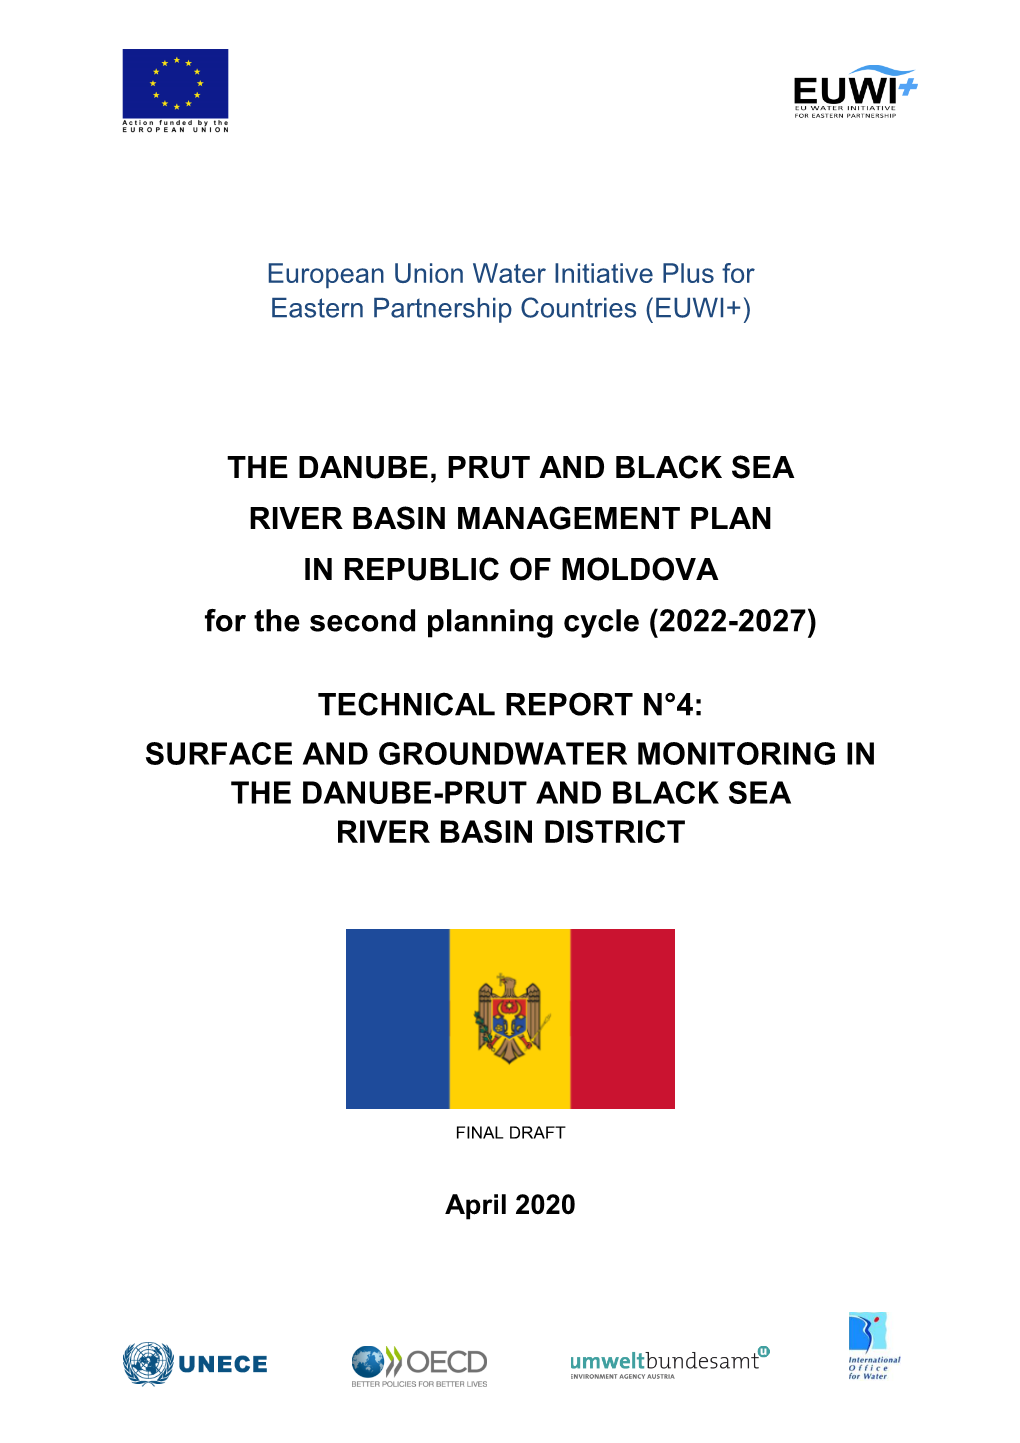 THE DANUBE, PRUT and BLACK SEA RIVER BASIN MANAGEMENT PLAN in REPUBLIC of MOLDOVA for the Second Planning Cycle (2022-2027)